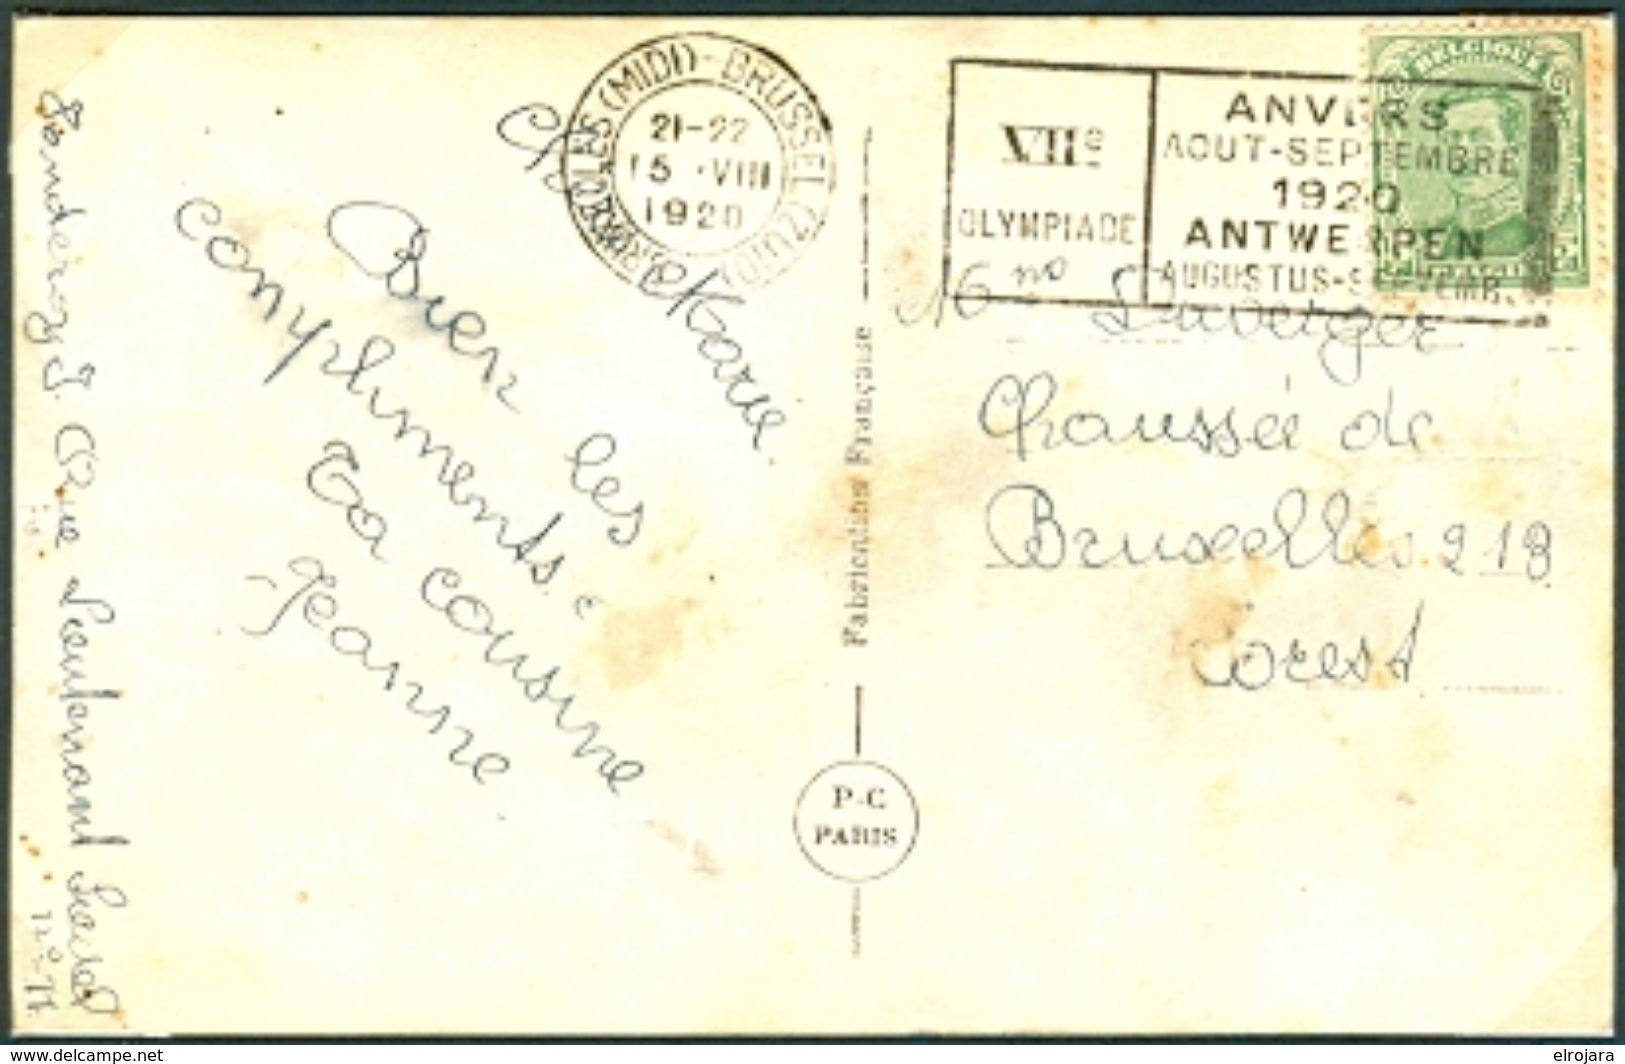 BELGIUM Postcard With Olympic Machine Cancel Bruxelles Midi Brussel Zuid Dated 15-VIII 1920 Athletic Day - Sommer 1920: Antwerpen